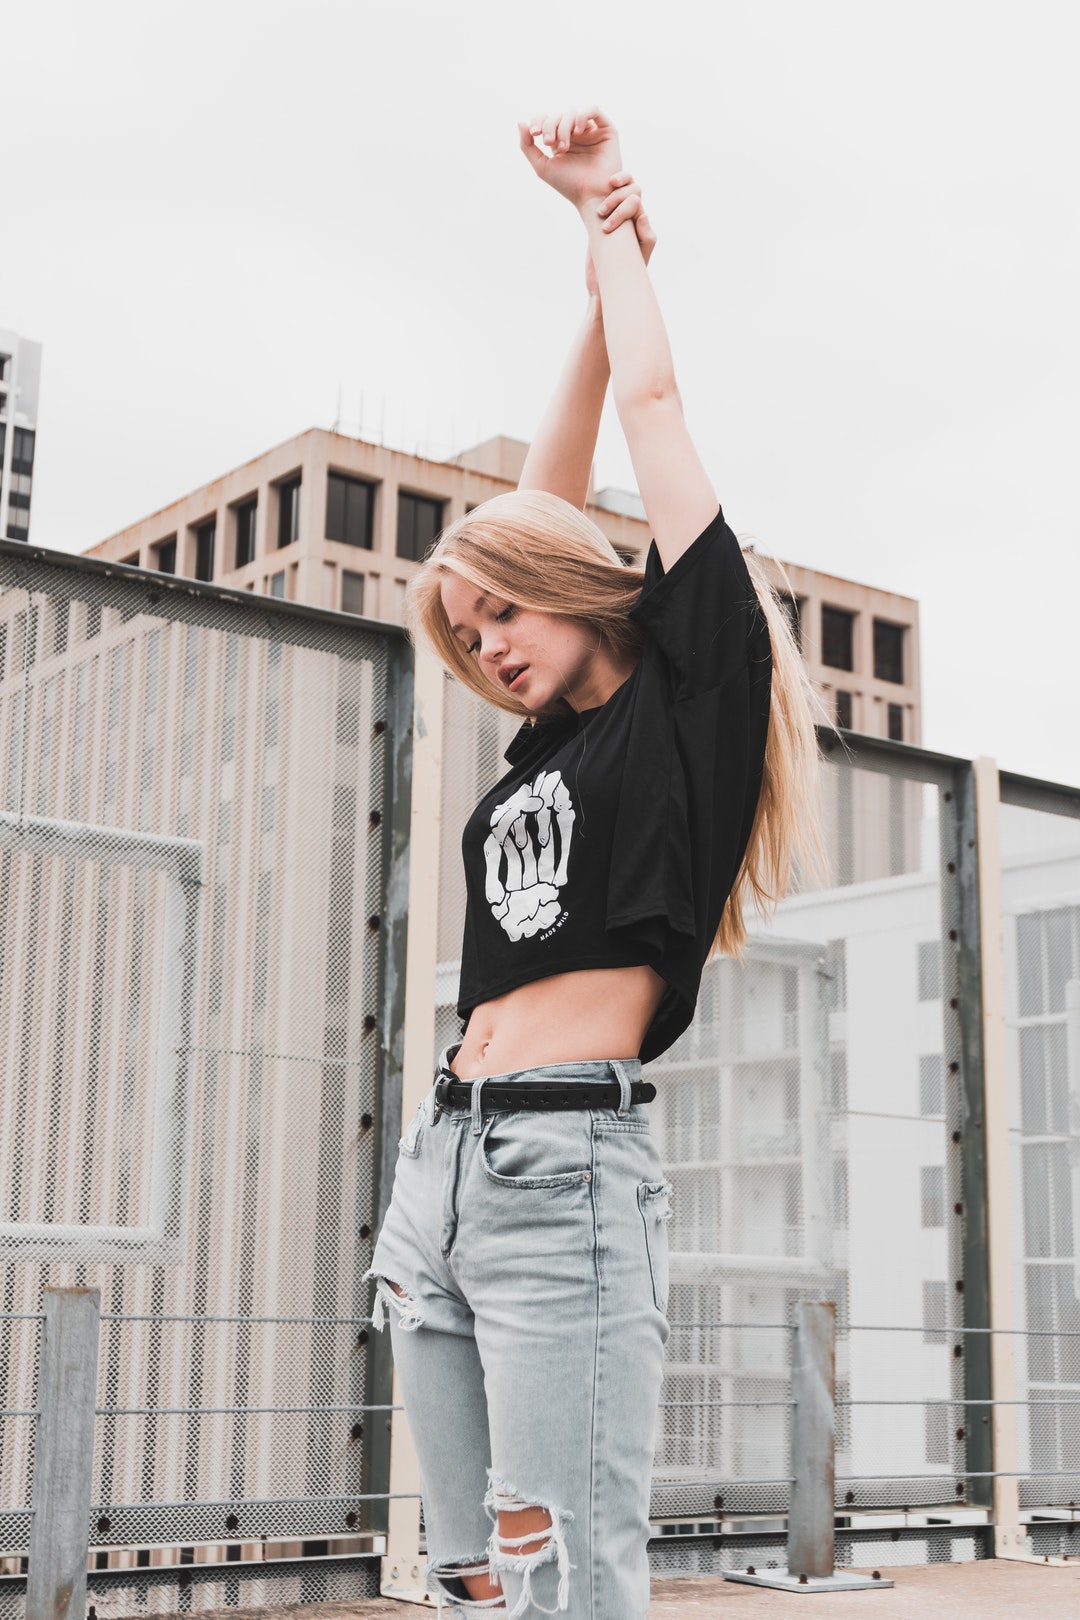 Woman in ripped jeans and a skull shirt stretches her arms